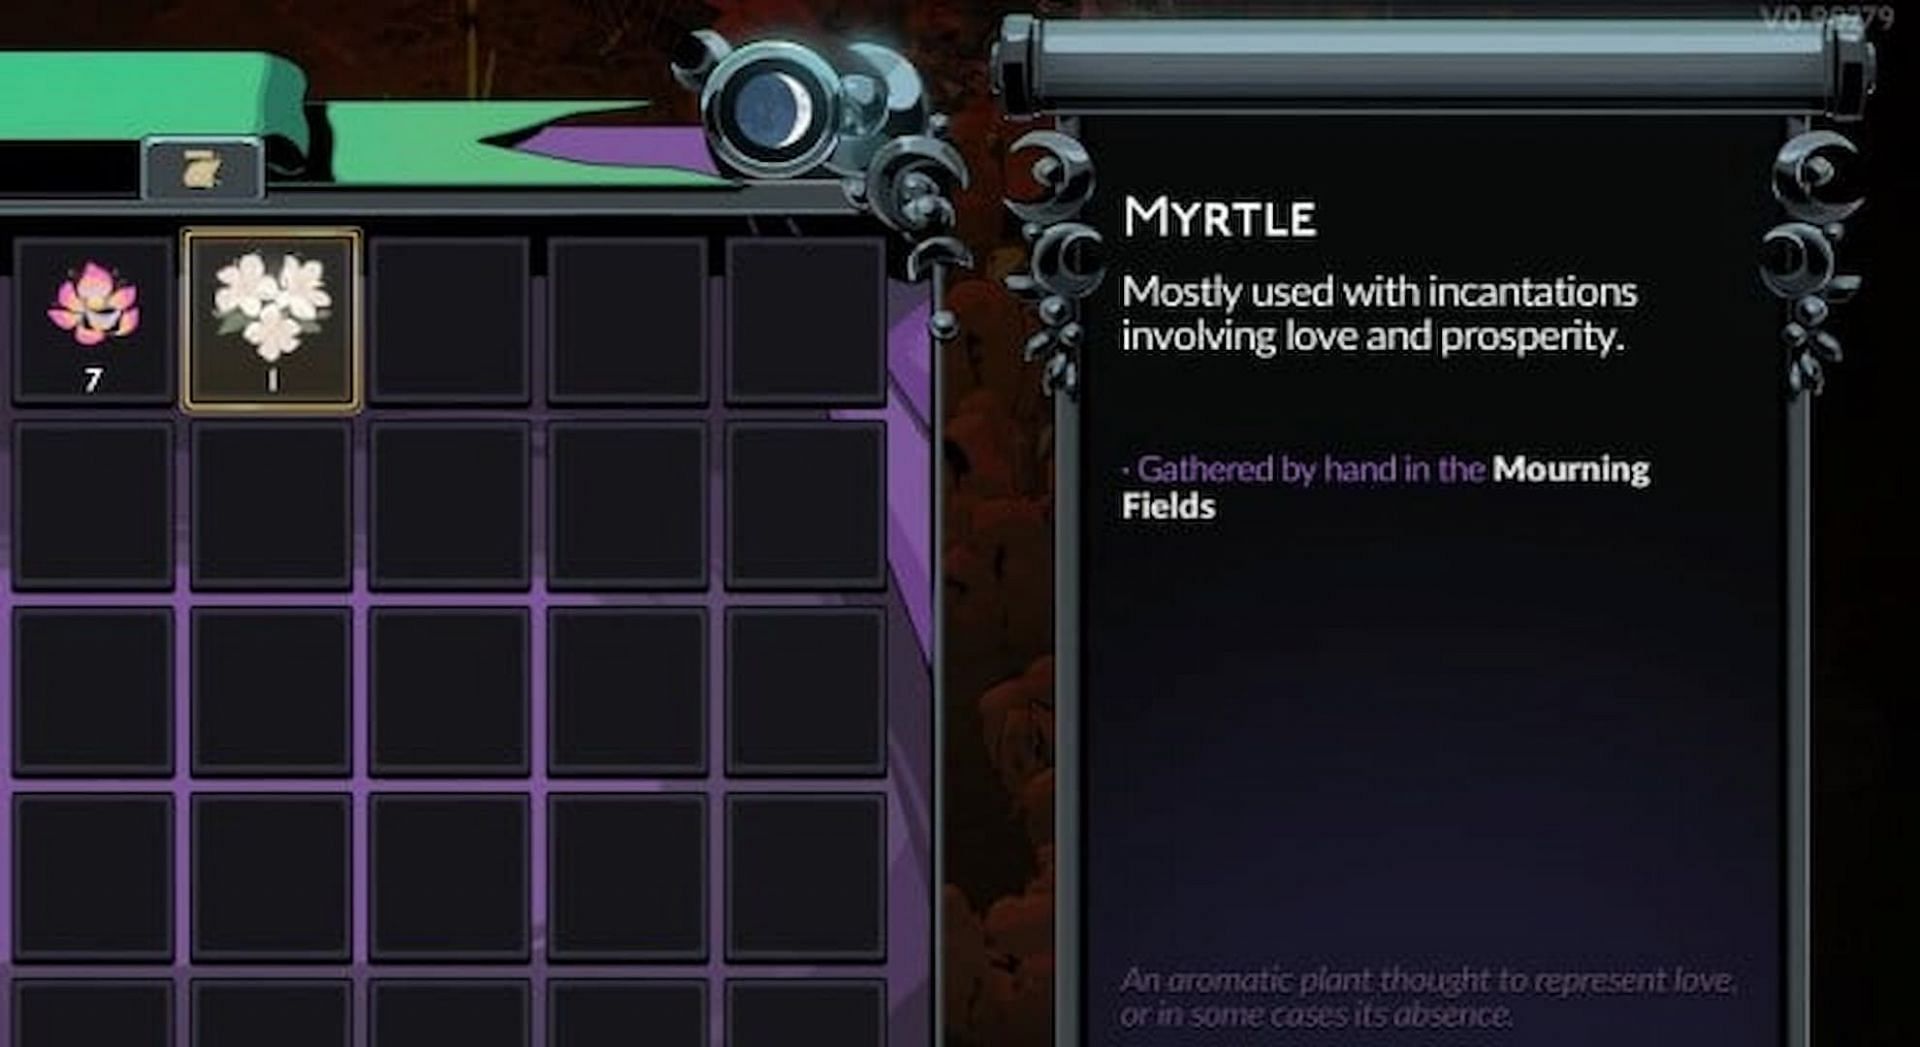 You can collect Myrtle in the Fields of Mourning (Image via Supergiant Games)